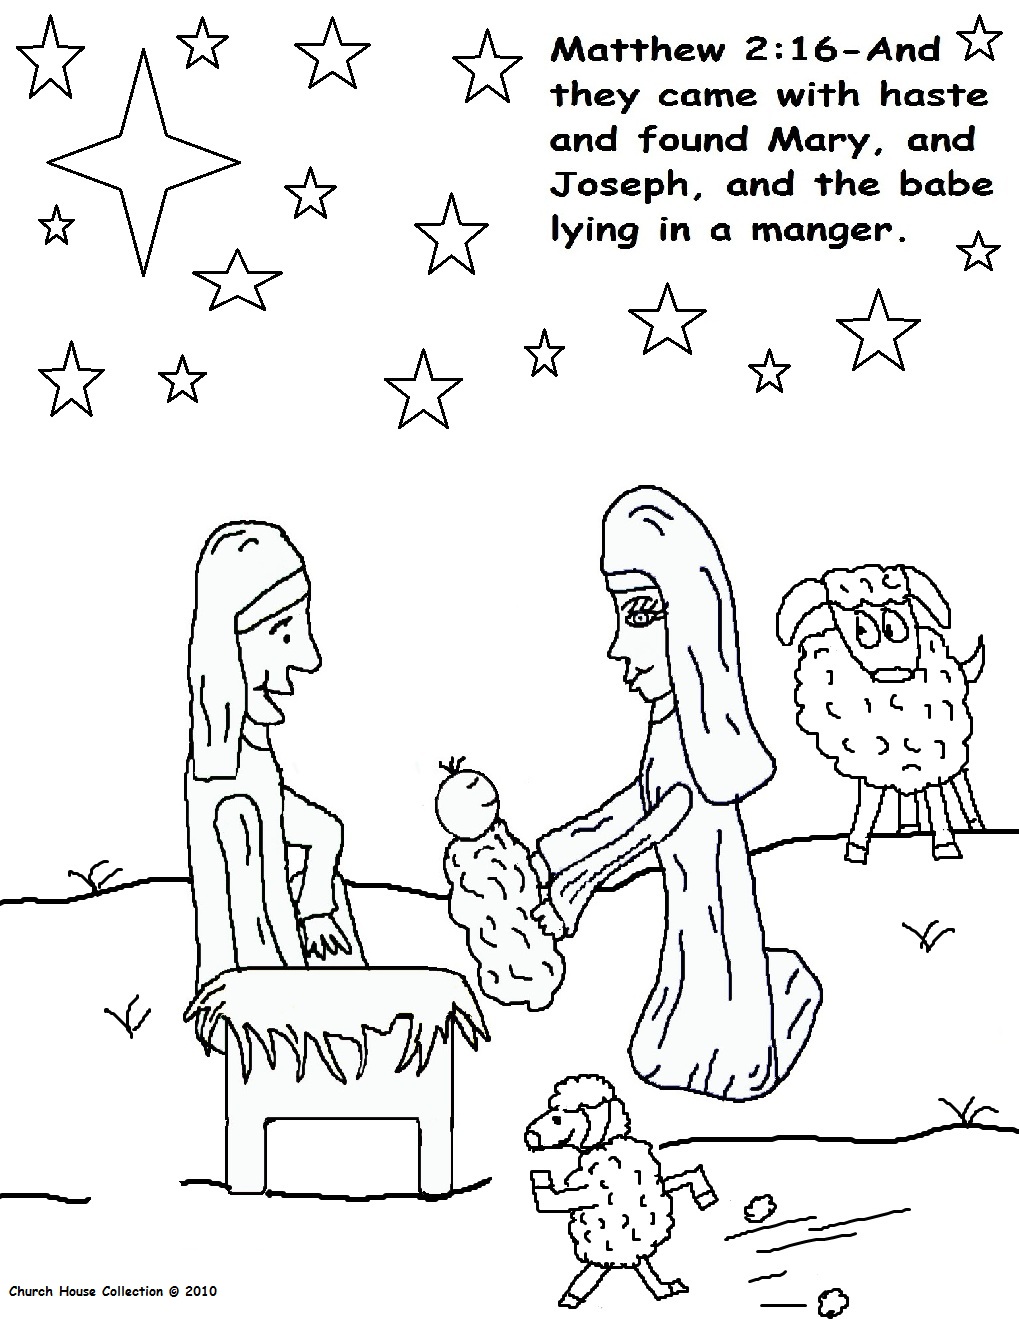 Free Christmas "The Birth Of Jesus" Coloring Pages For Kids by Church House Collection